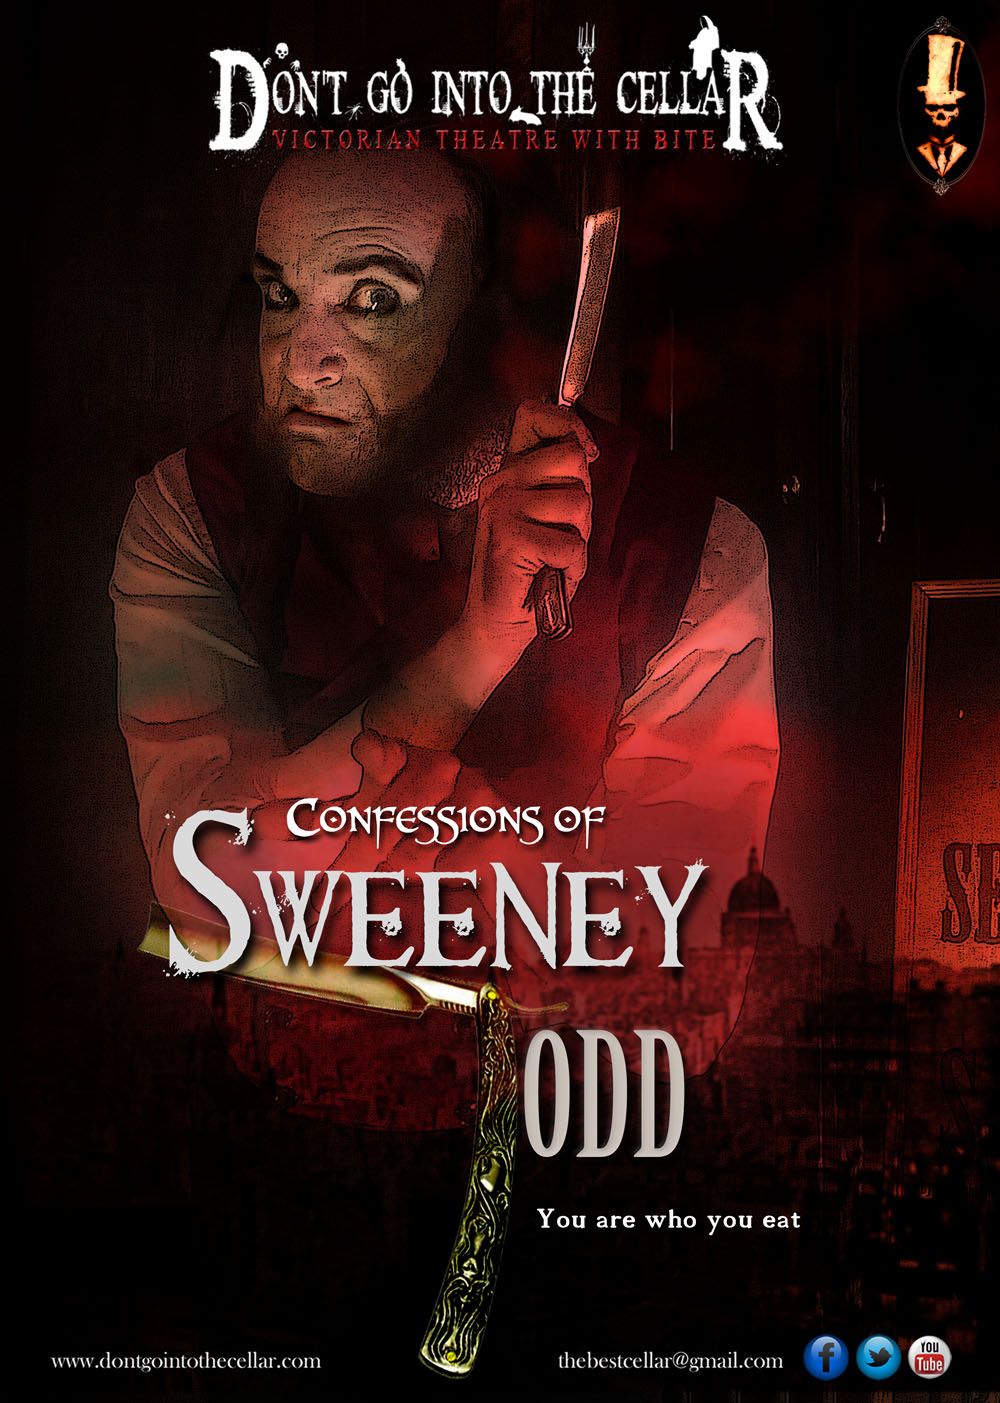 Confessions of Sweeney Todd